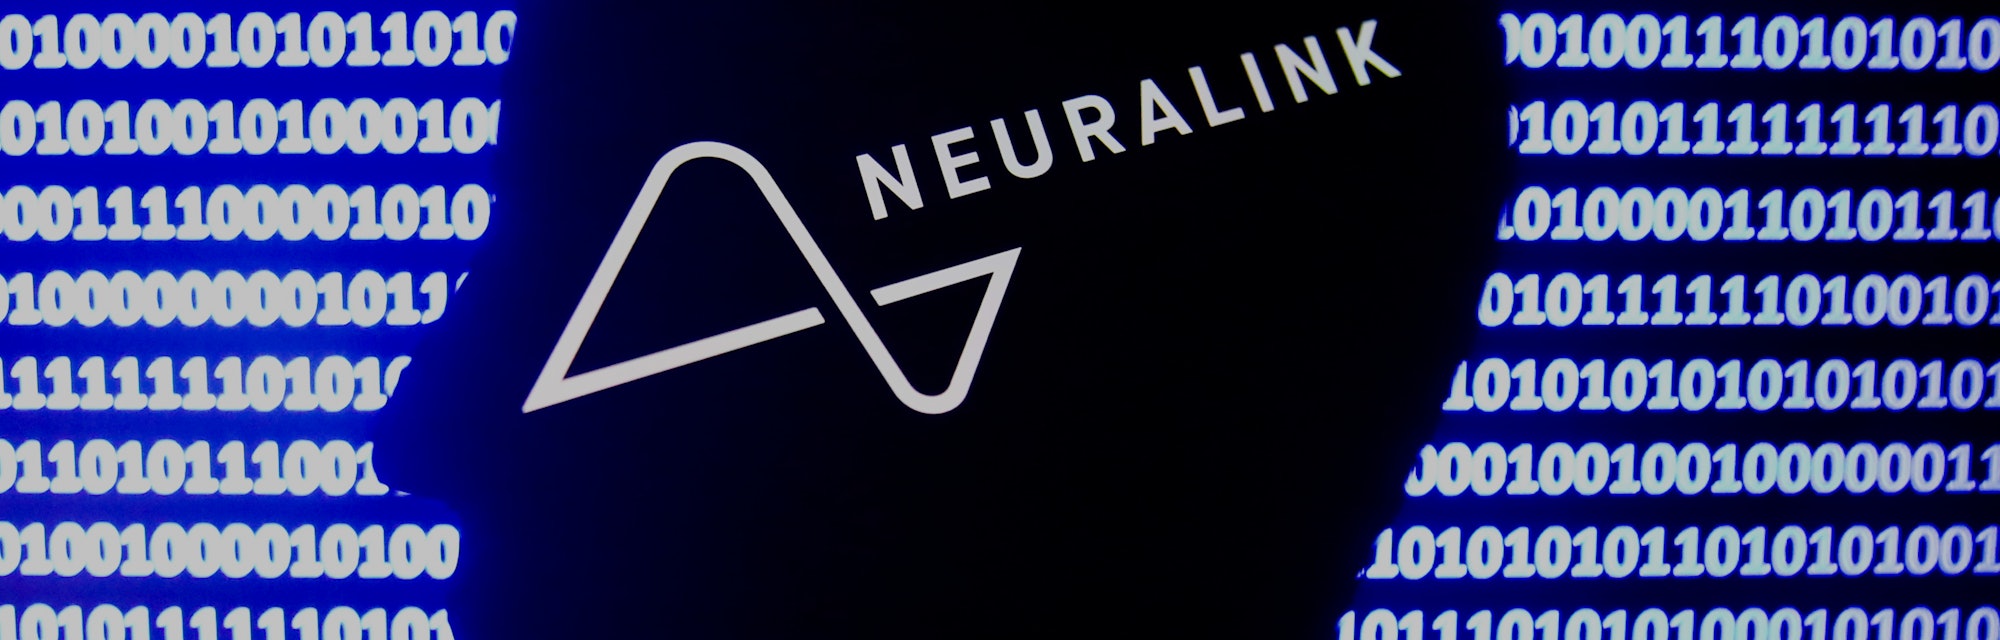 Neuralink logo displayed on a phone screen, a silhouette of a paper in shape of a human face and a b...